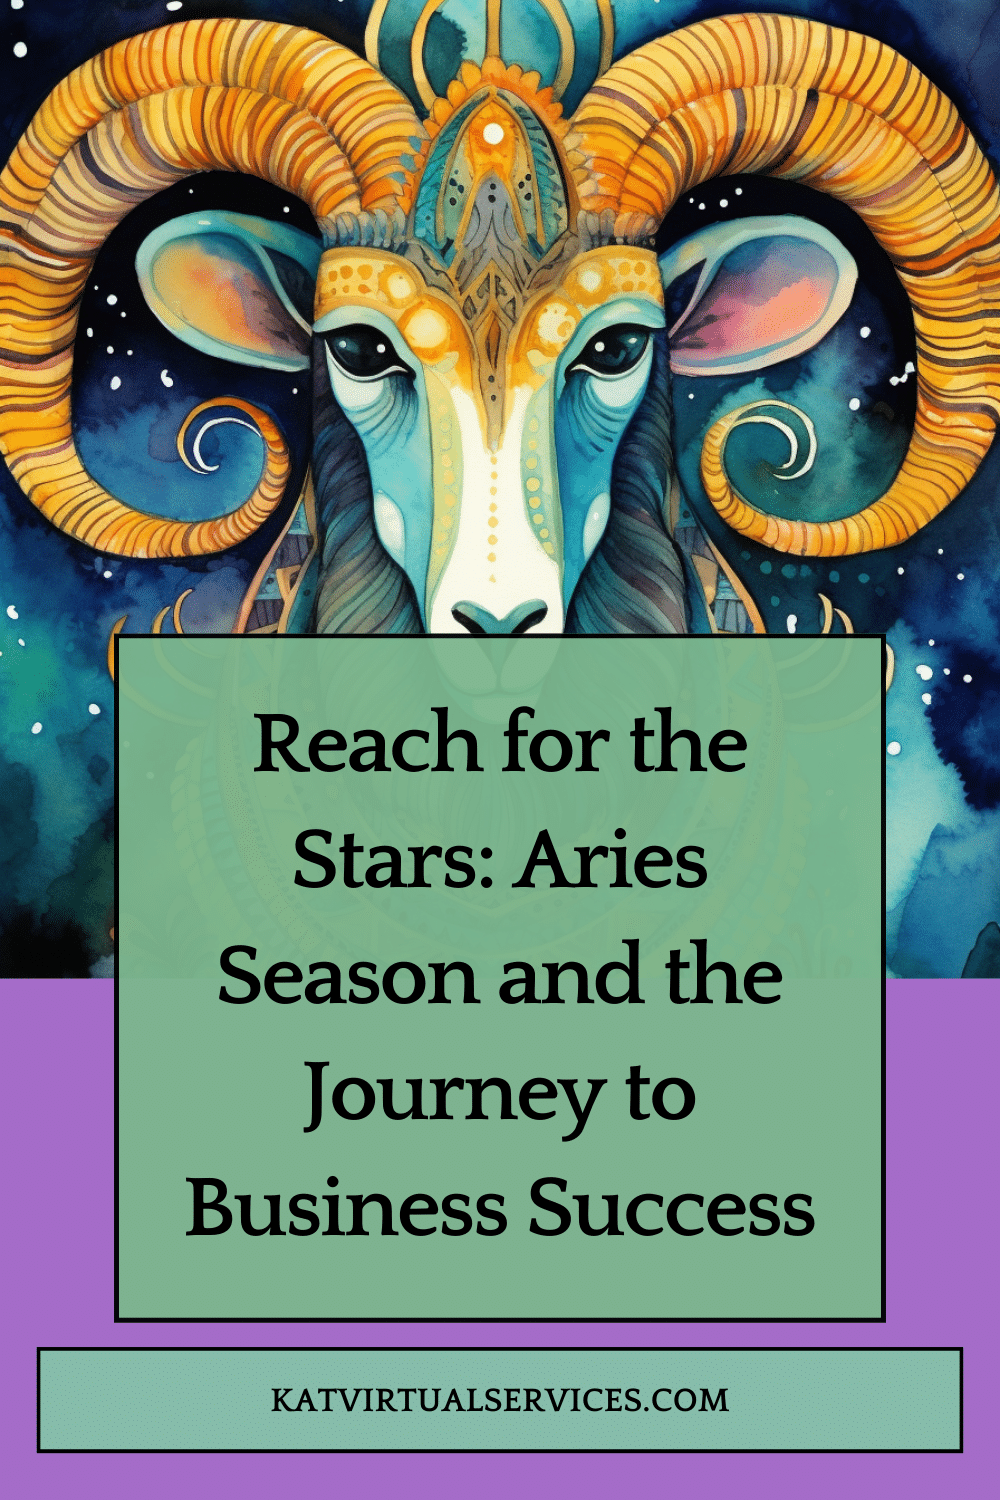 Aries season and the journey to business success